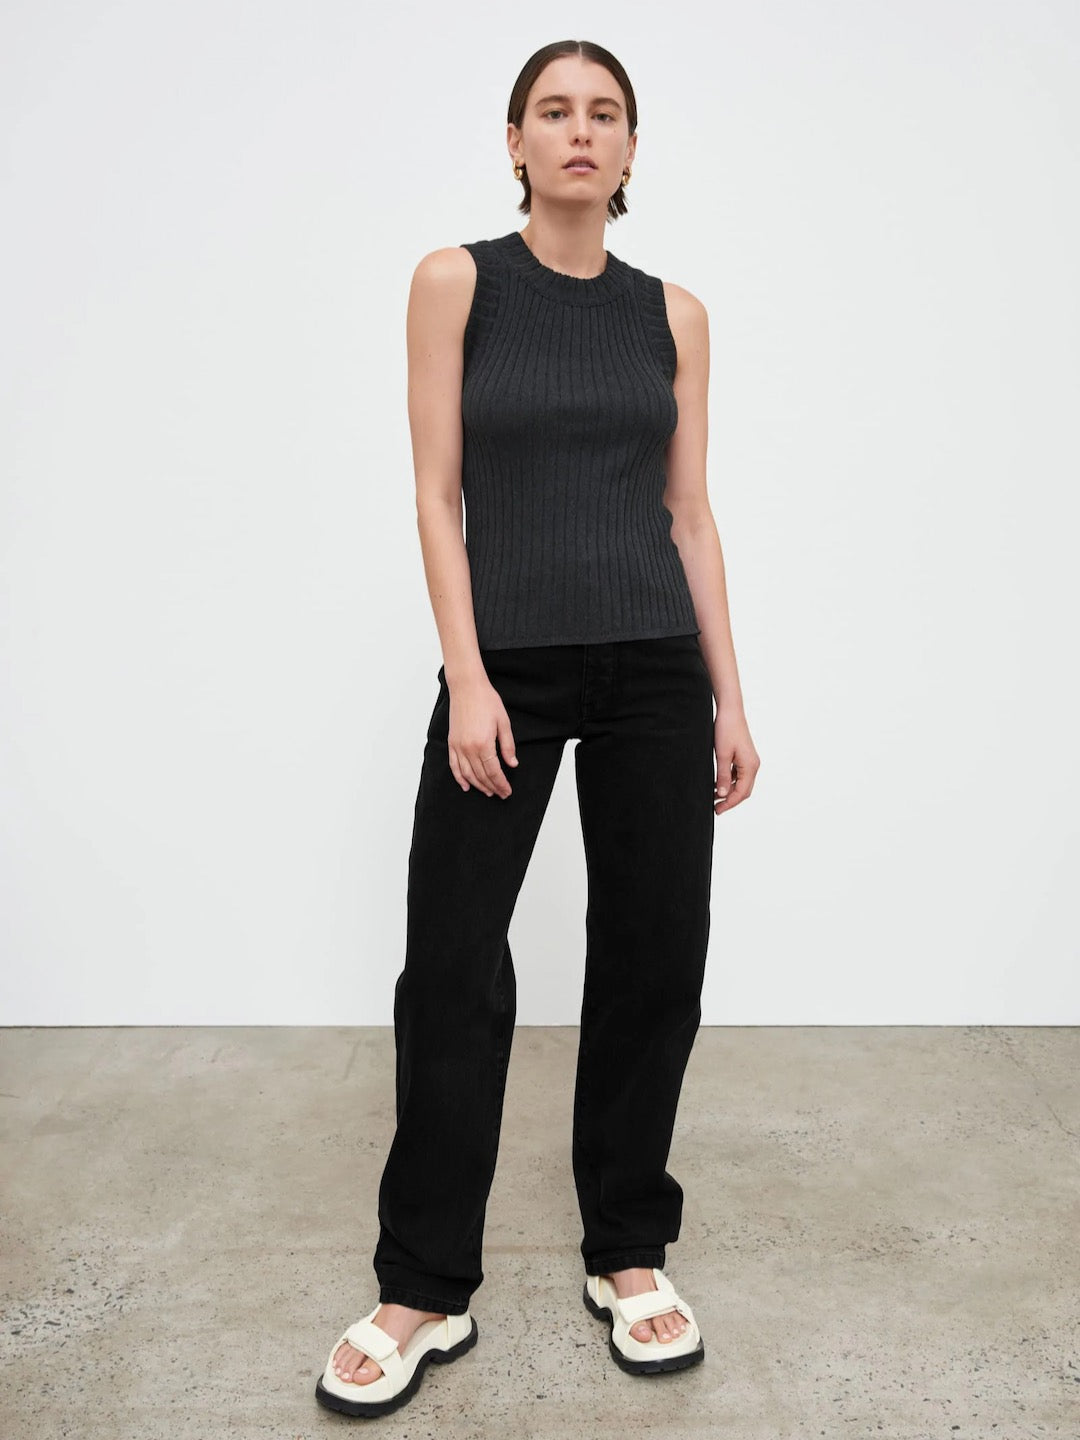 Solar Singlet – Charcoal Marle by Kowtow.